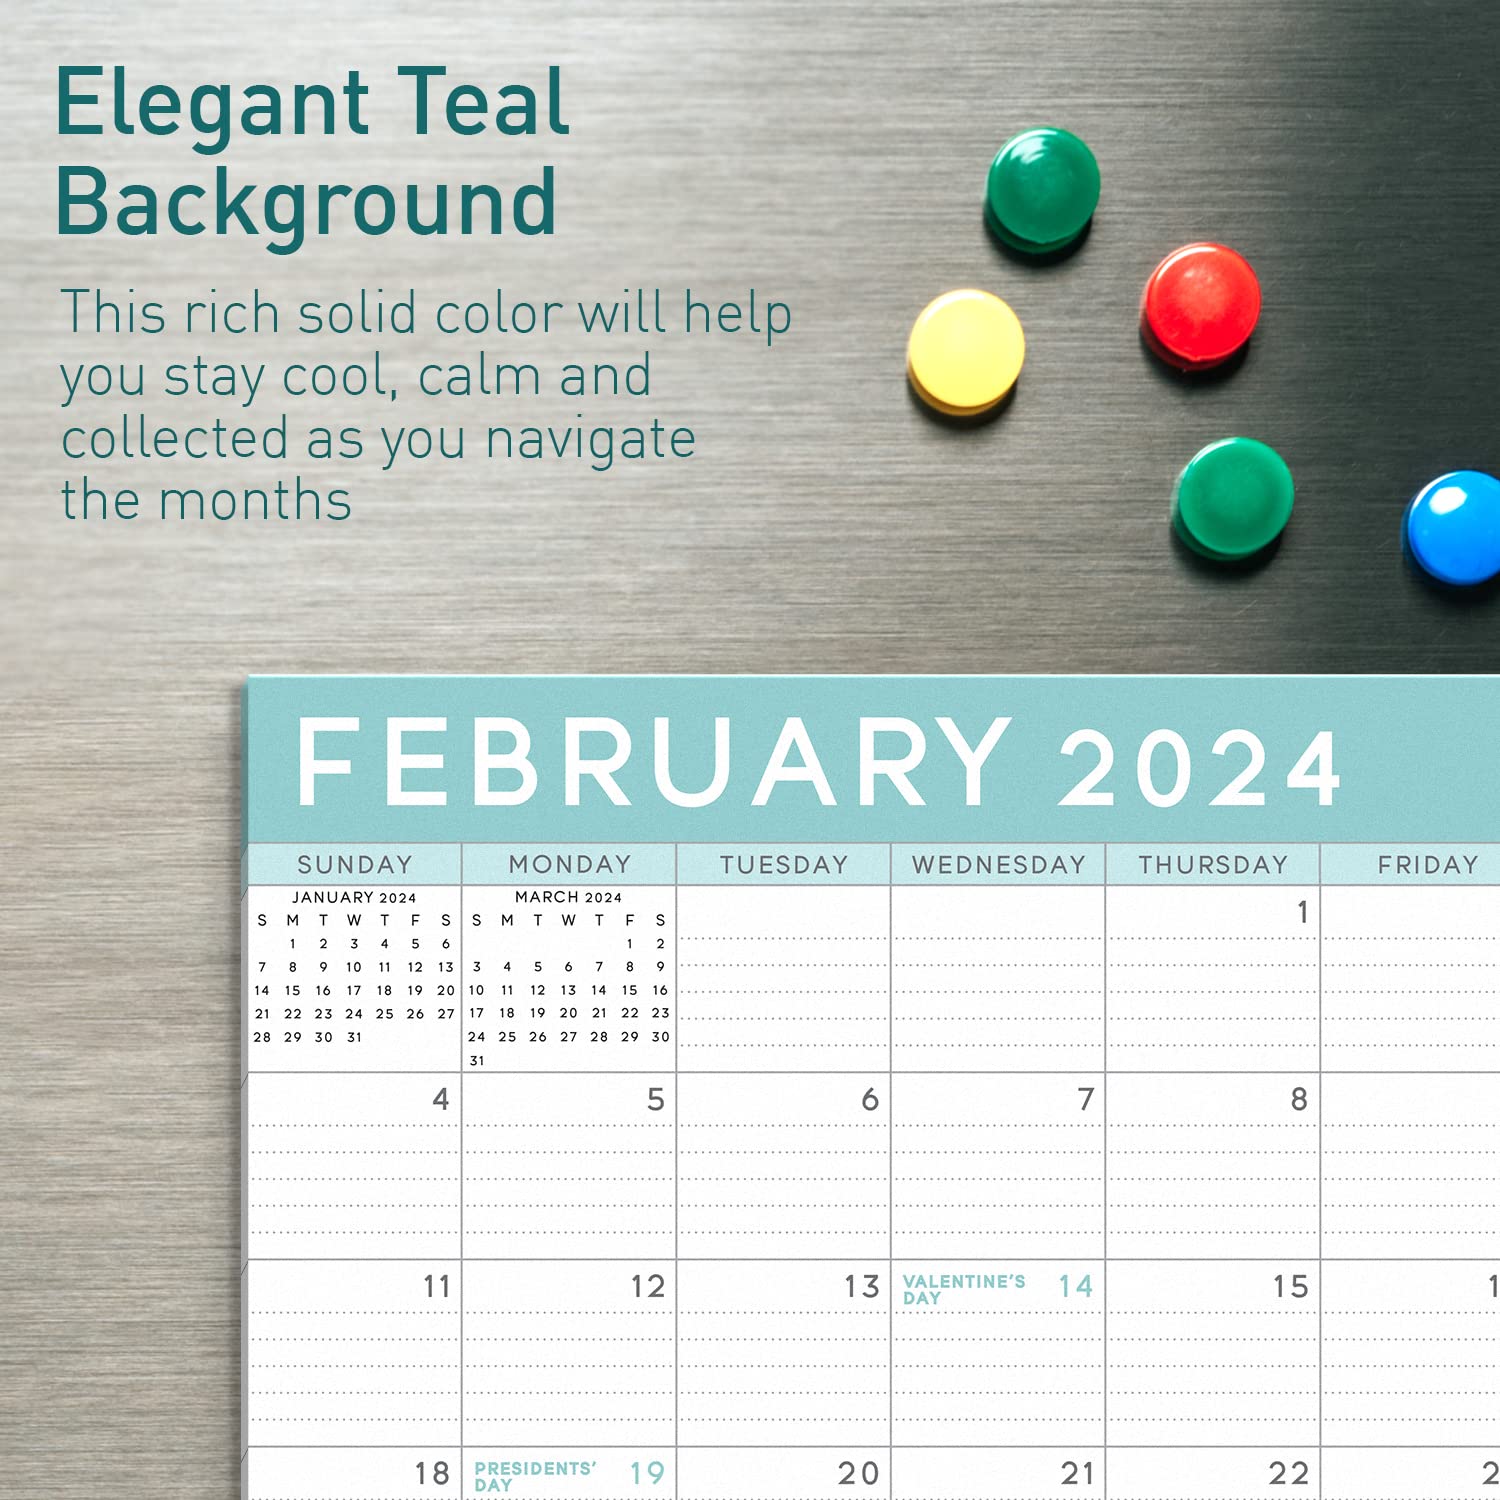 S&O Teal 2024 Magnetic Fridge Calendar Runs from Now to December 2024 - Tear-Off Refrigerator Calendar to Track Events & Appointments - Magnetic Calendar for Fridge for Easy Planning - 8"x10" in.